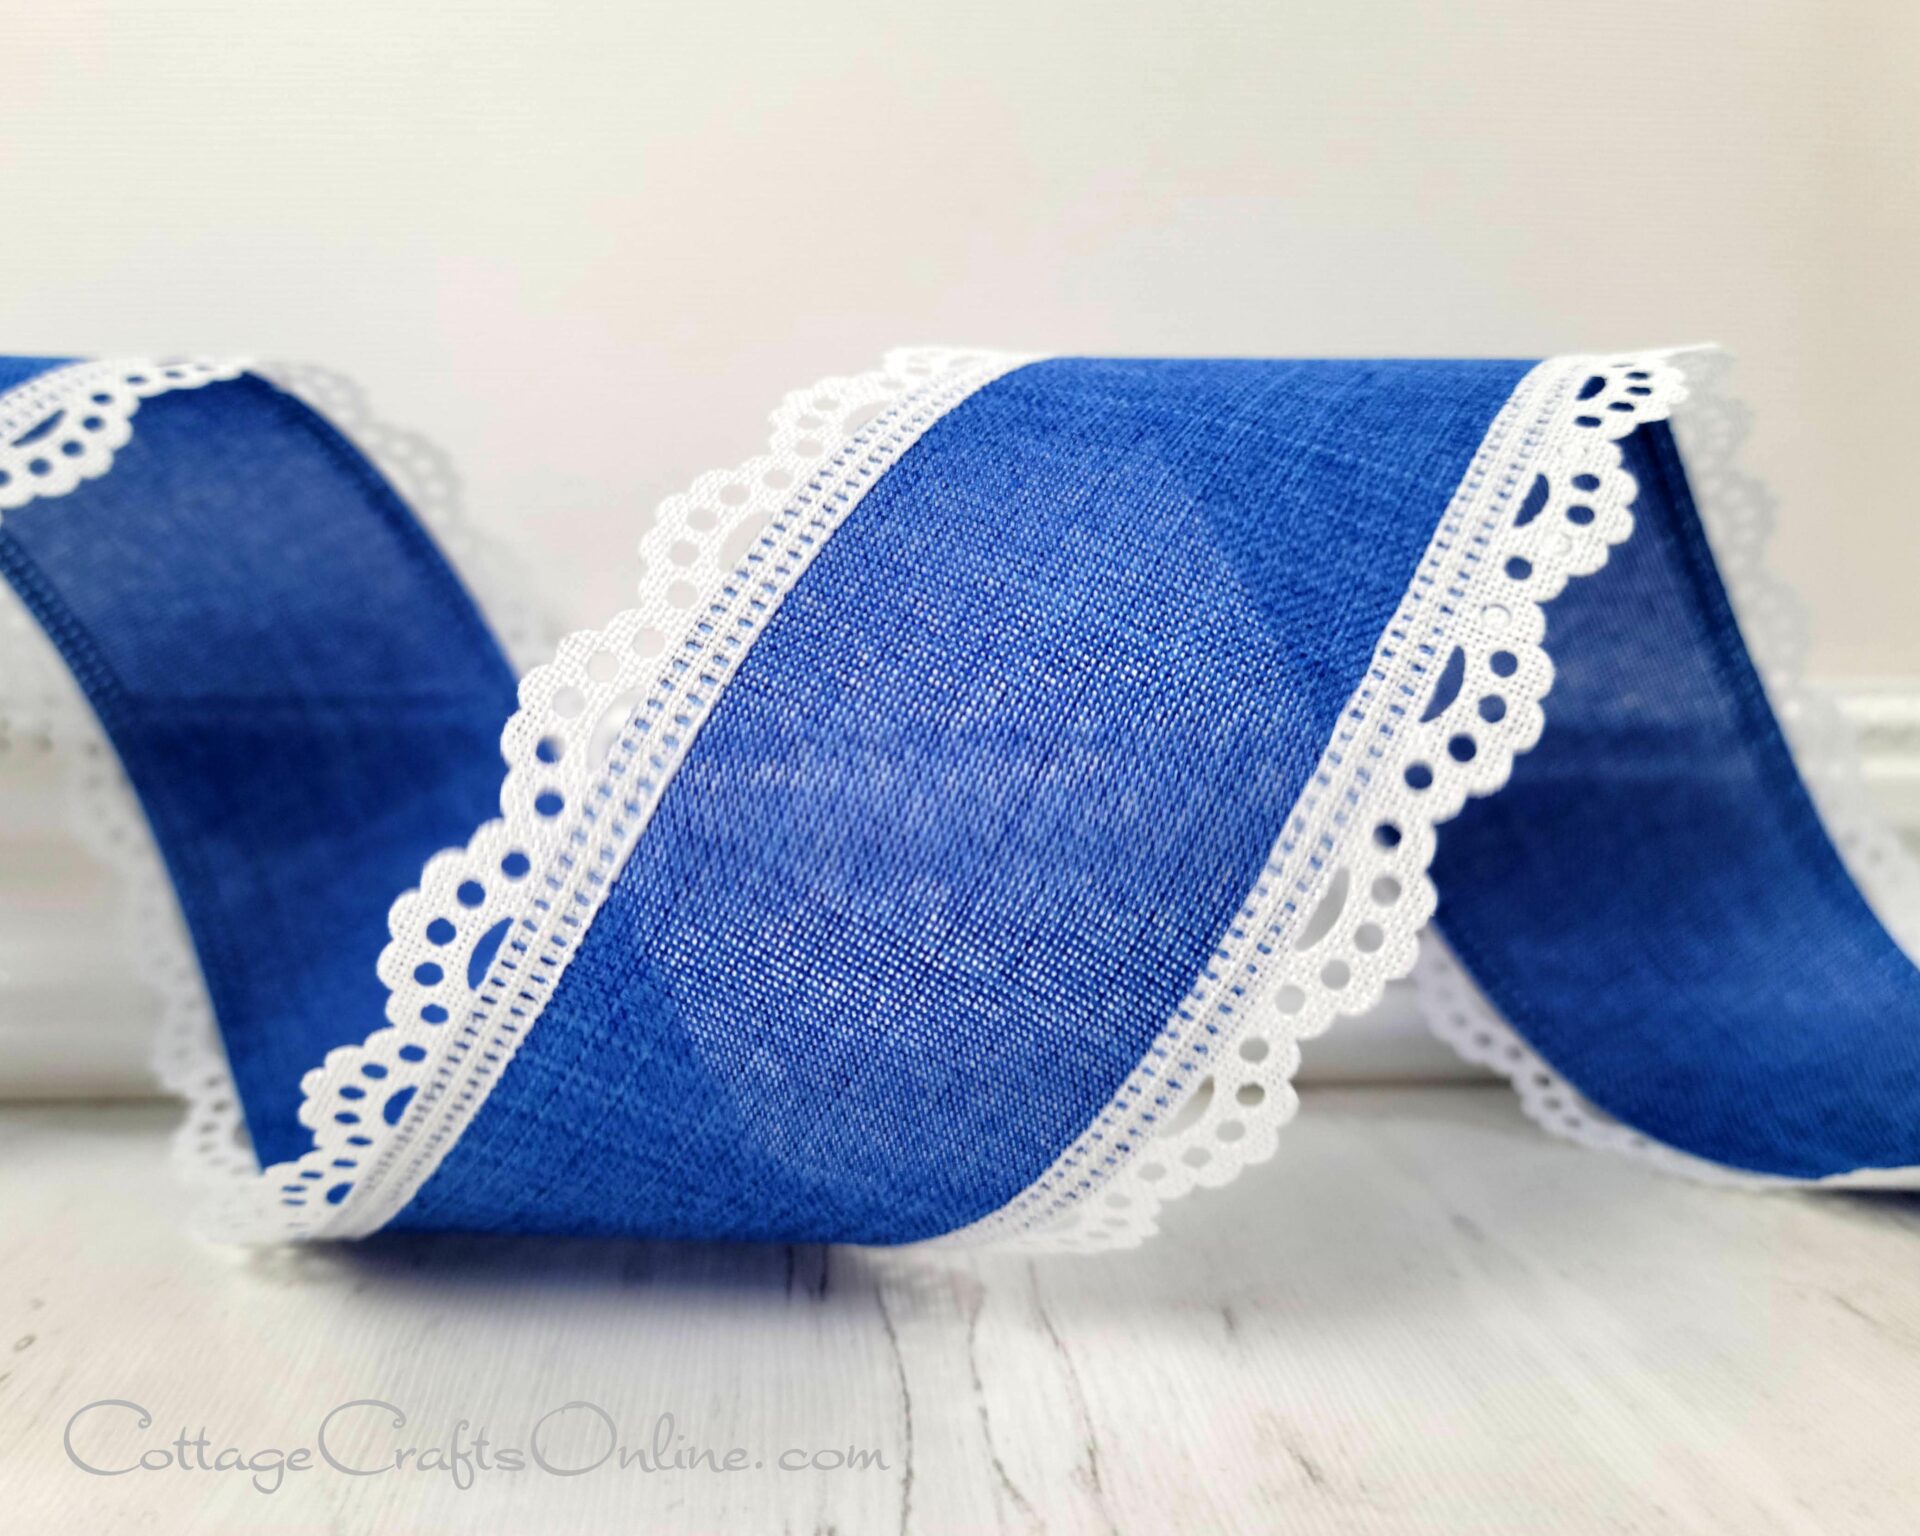 A blue ribbon with white lace trim on it.